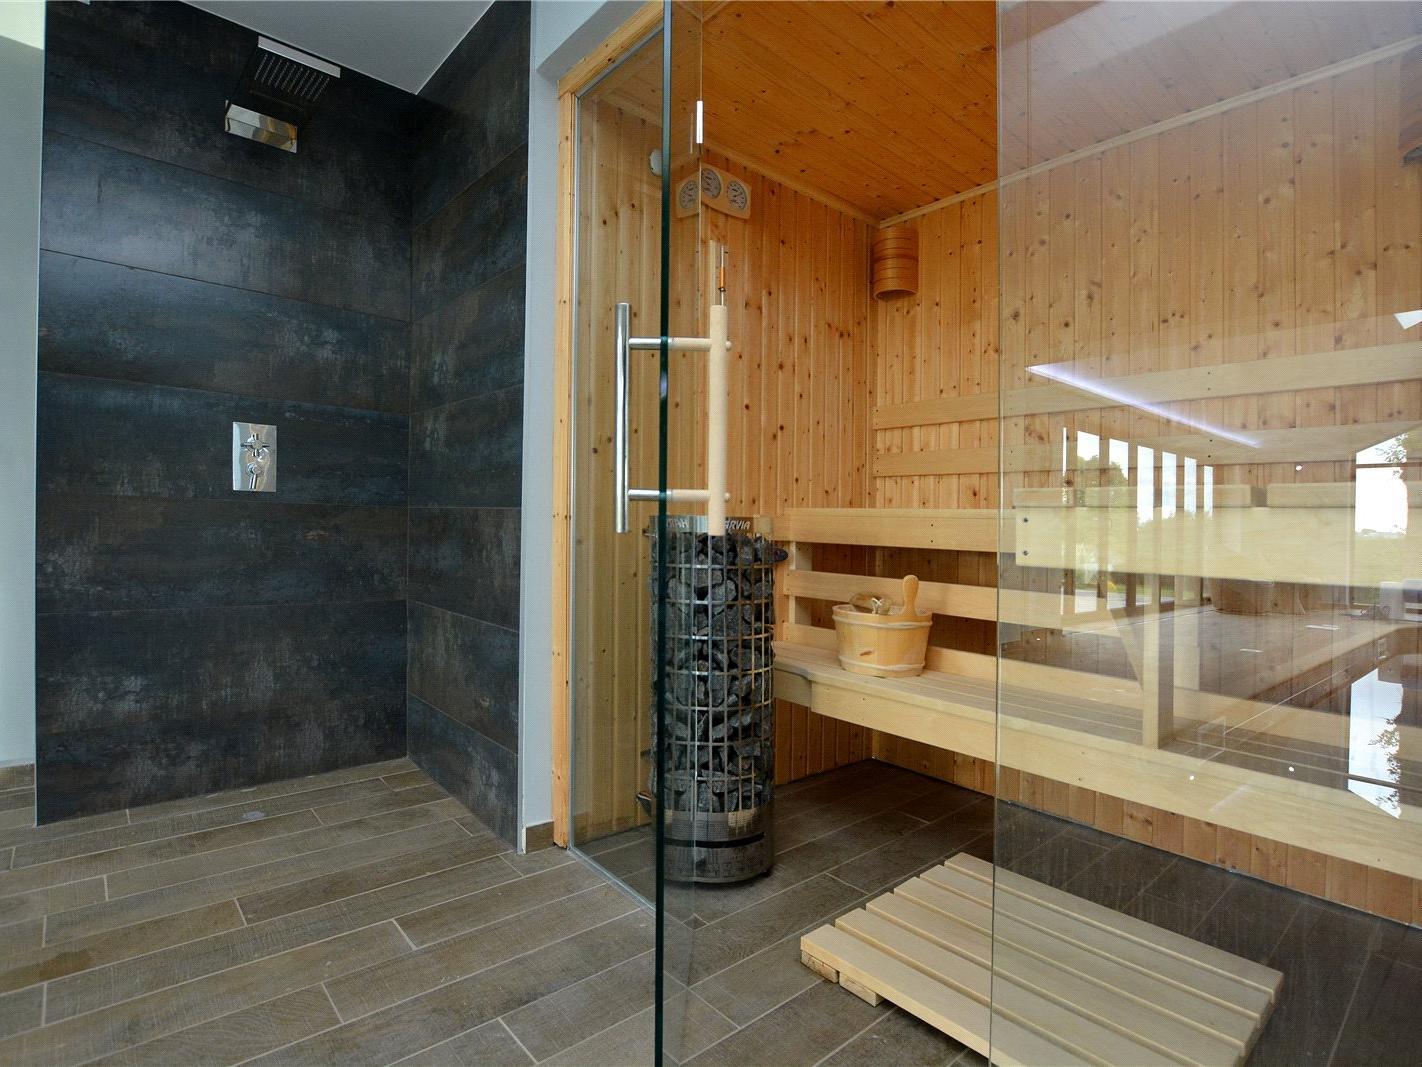 Relax and unwind after a workout in the pool in the house's very own sauna.